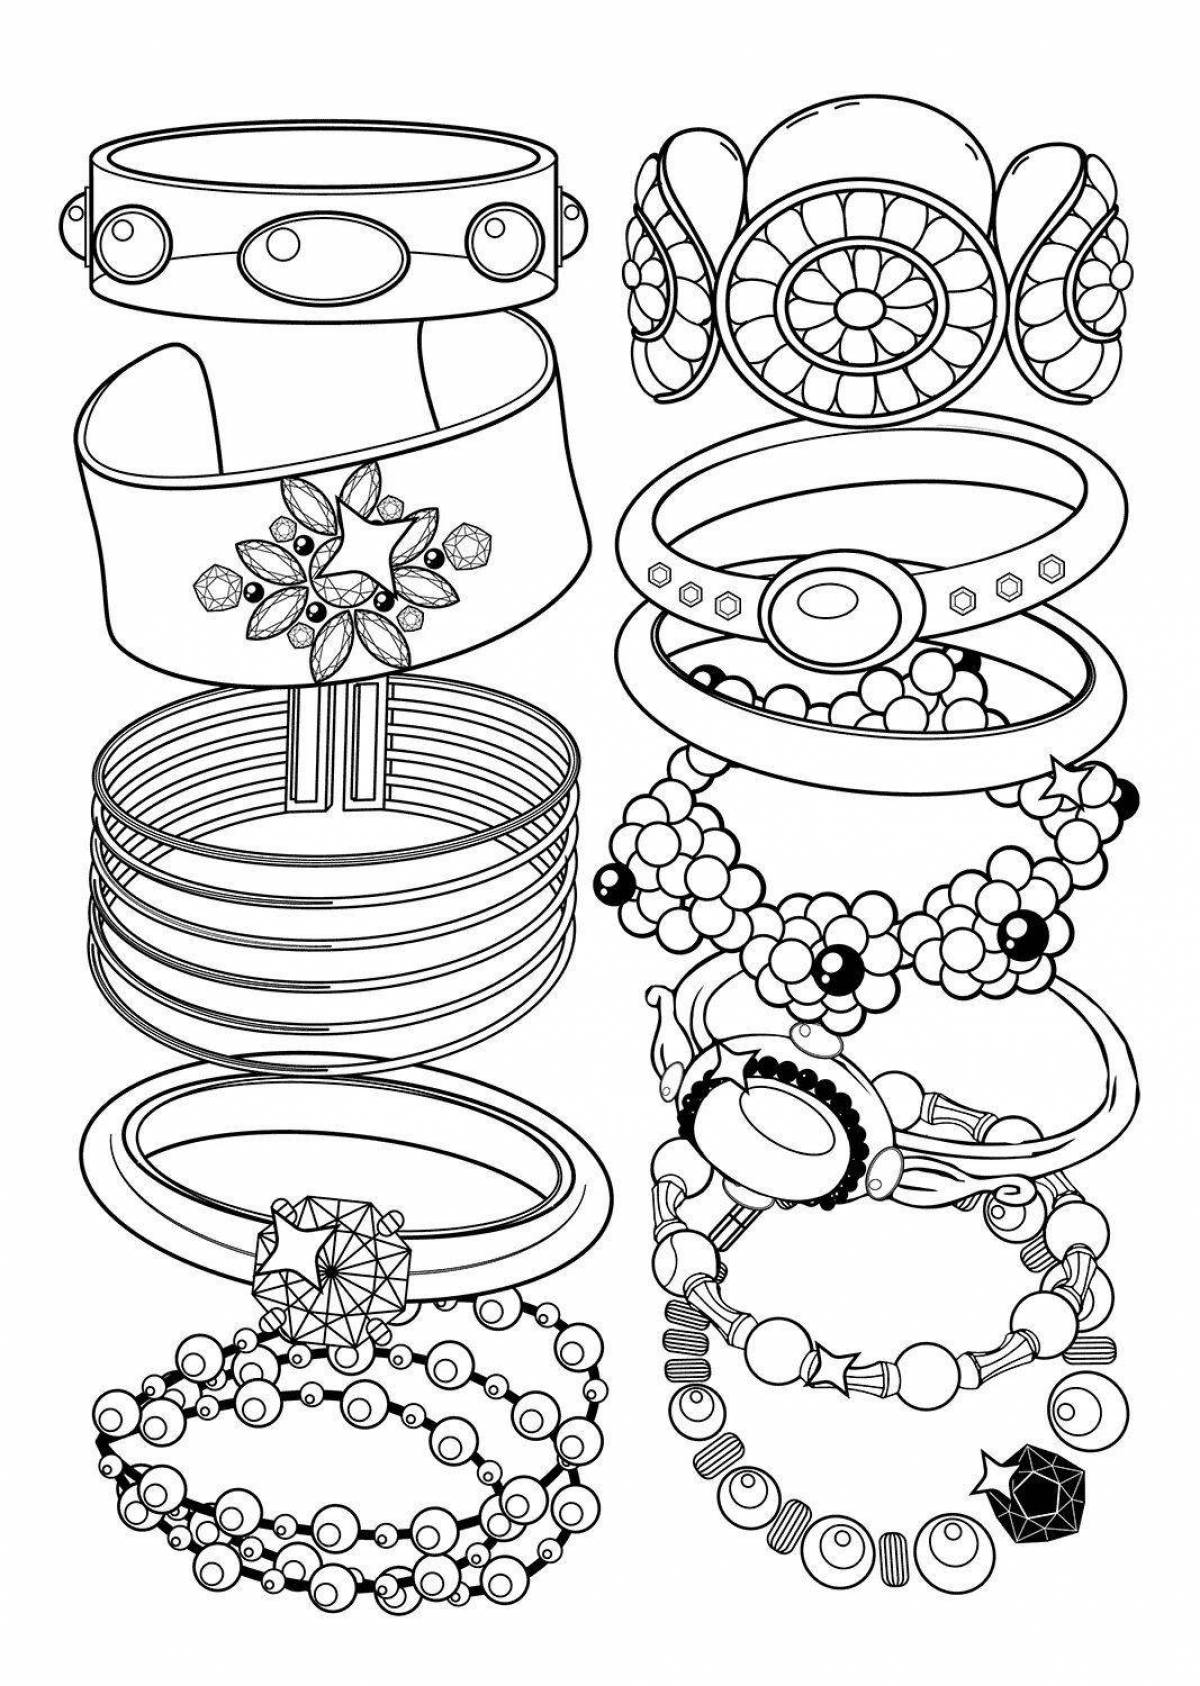 Coloring book fine accessories for girls